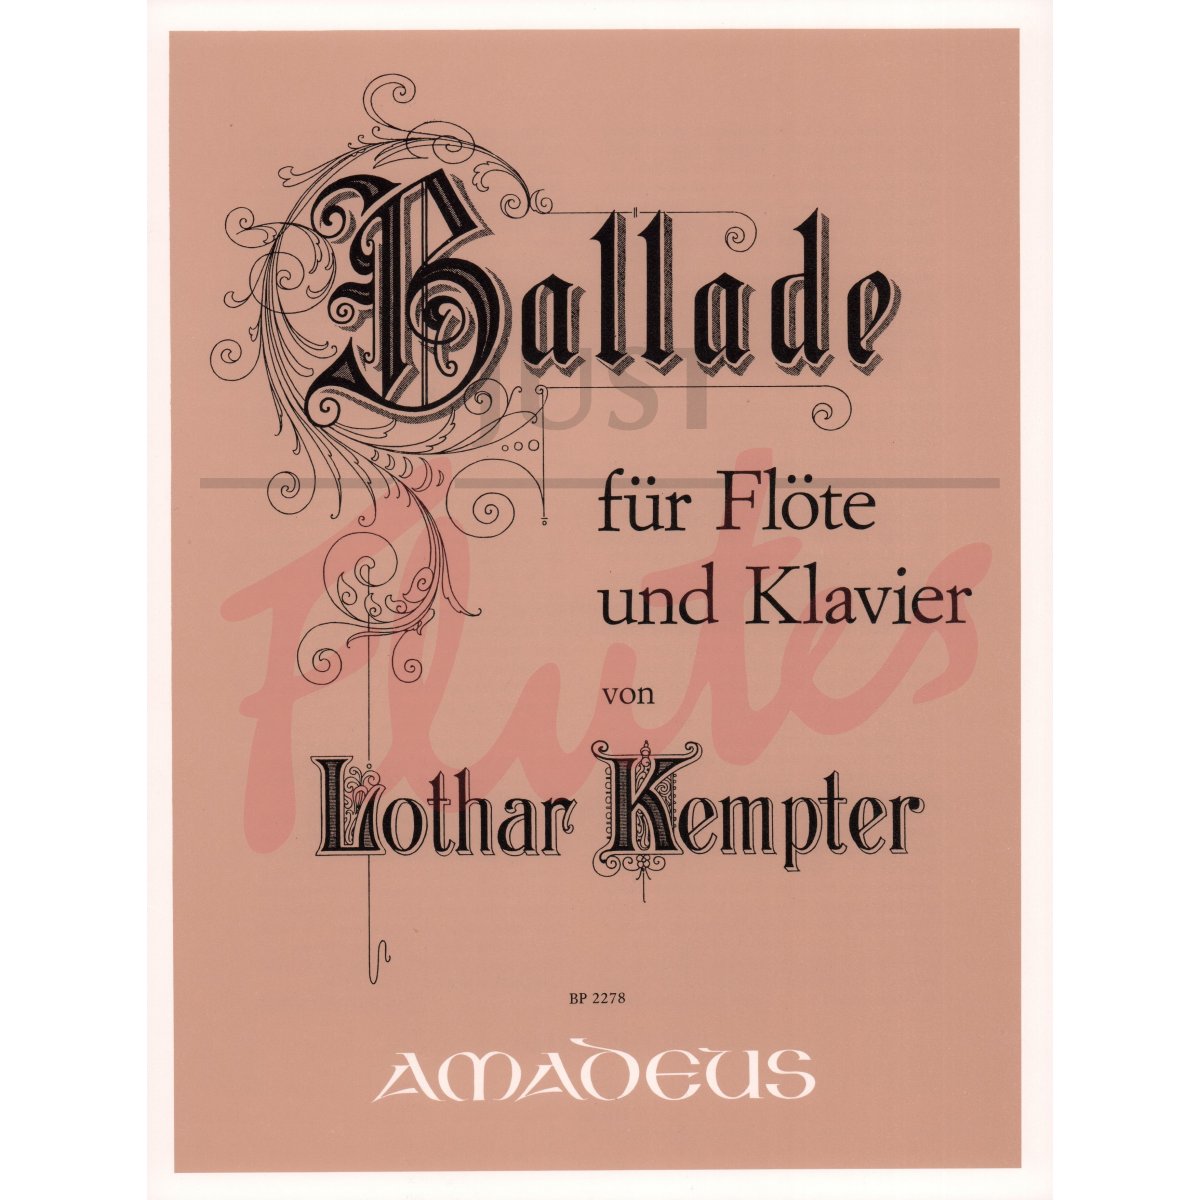 Ballade for Flute and Piano